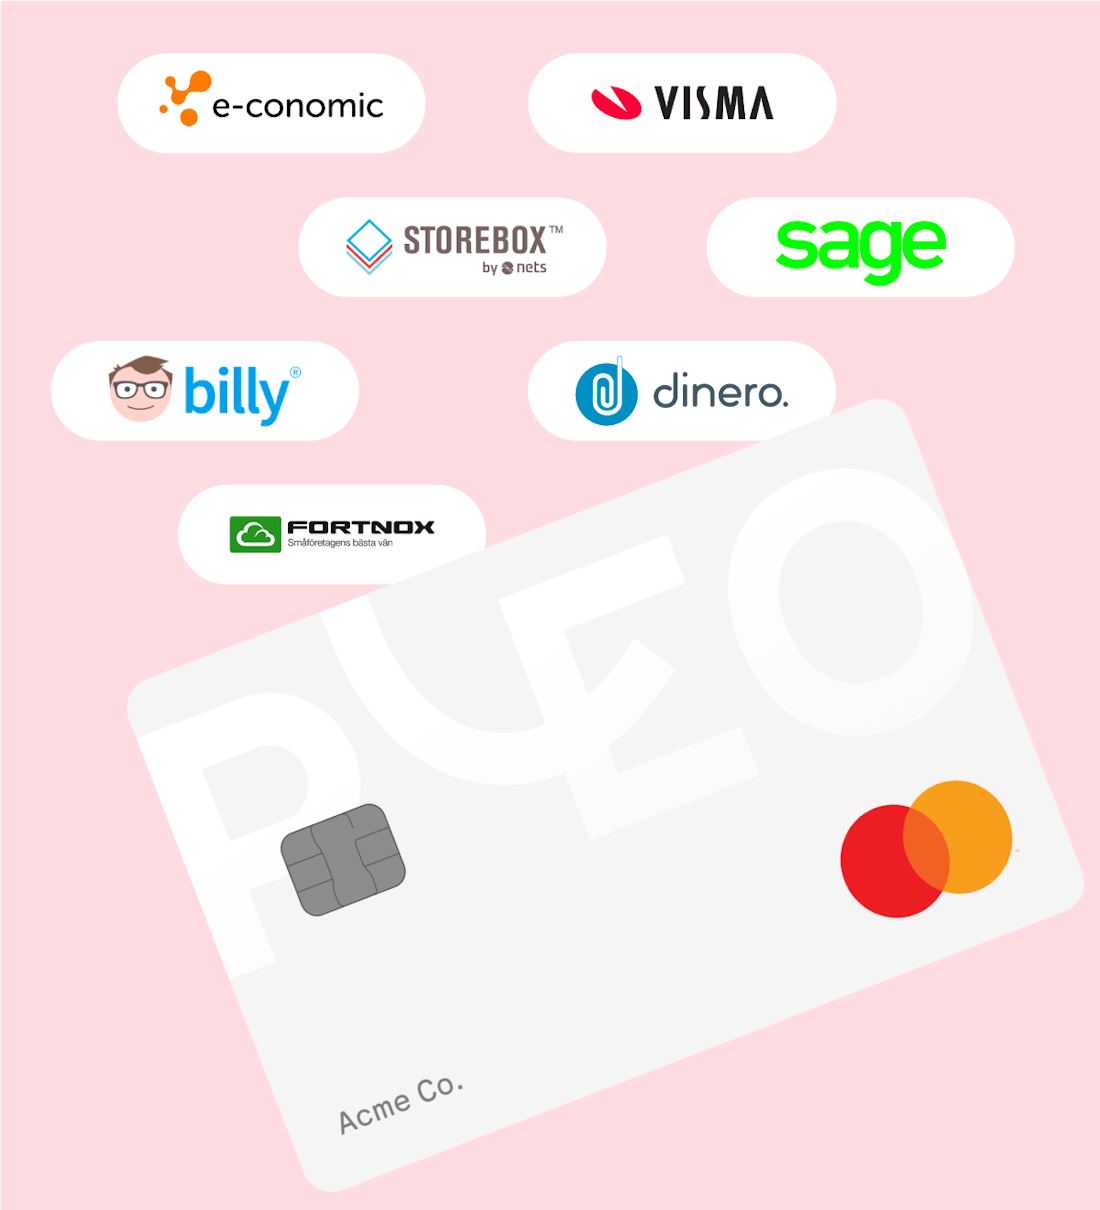 Pleo card and logo of accounting systems